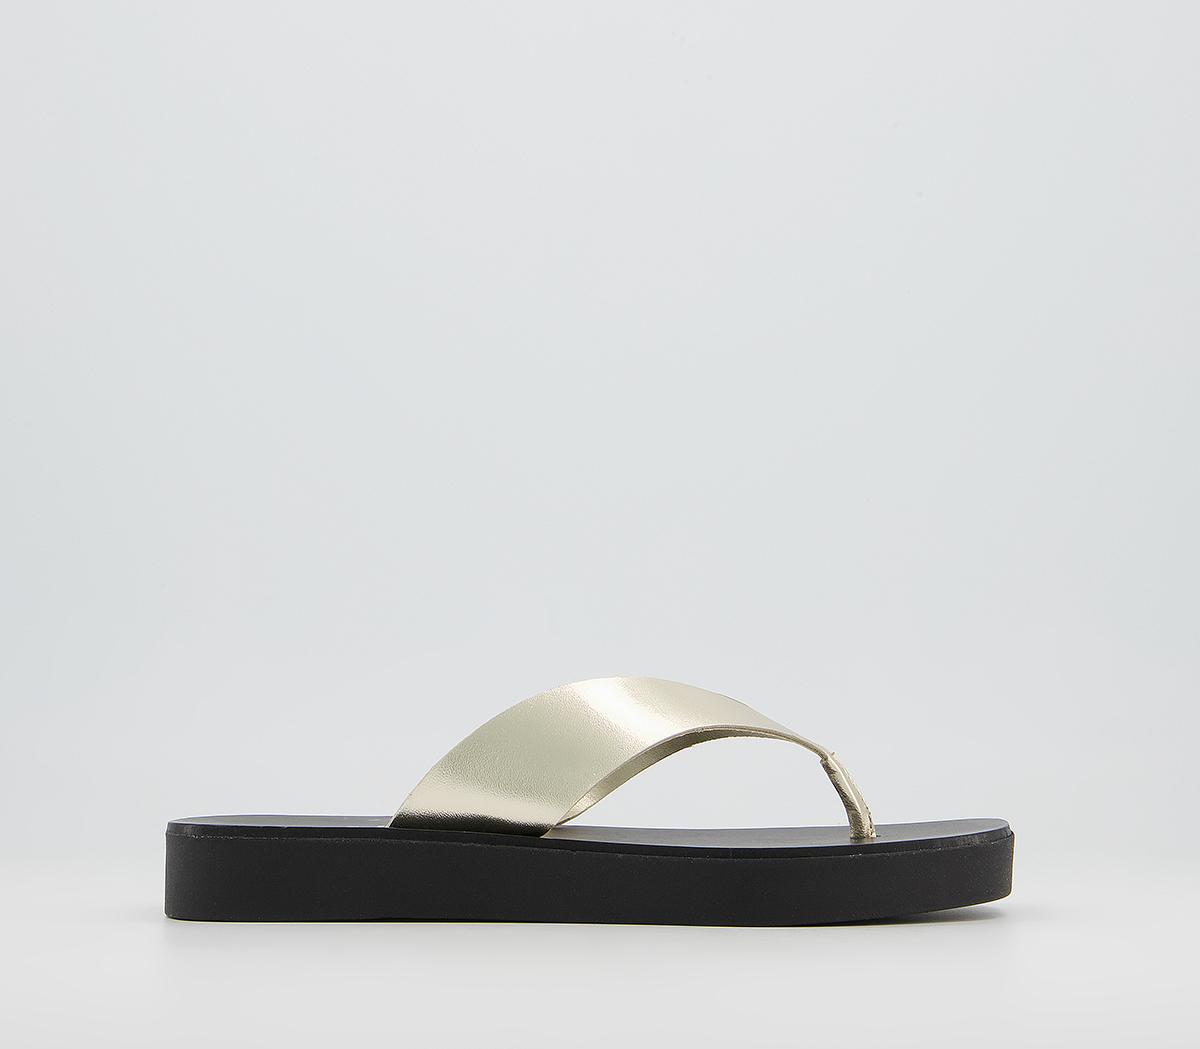 OFFICESophie Toe Post SandalsGold Leather